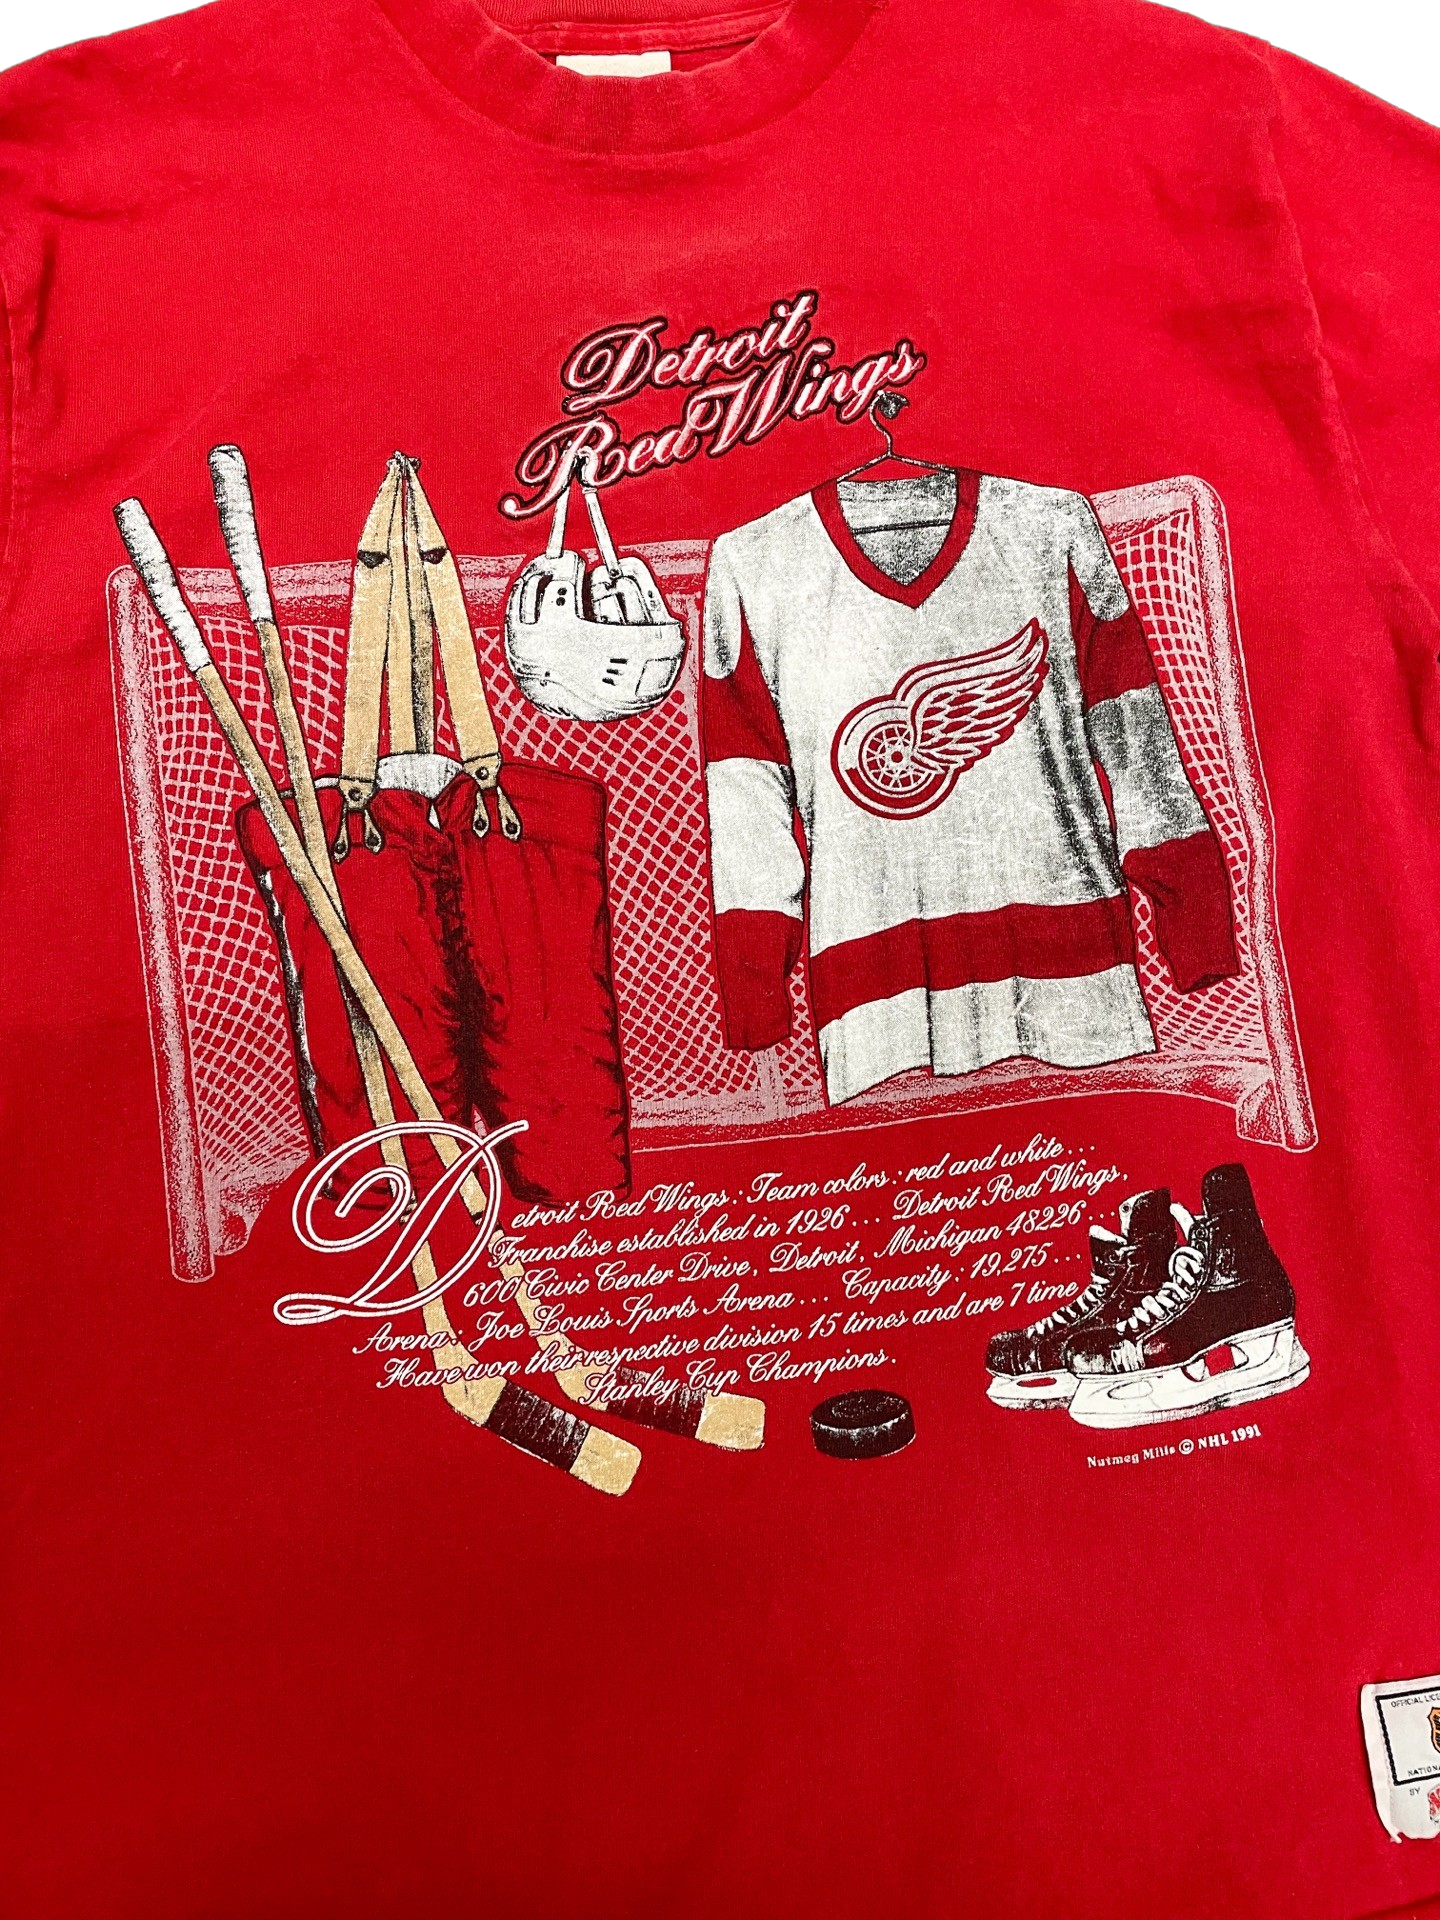 Vintage Detroit Red Wings t-shirt